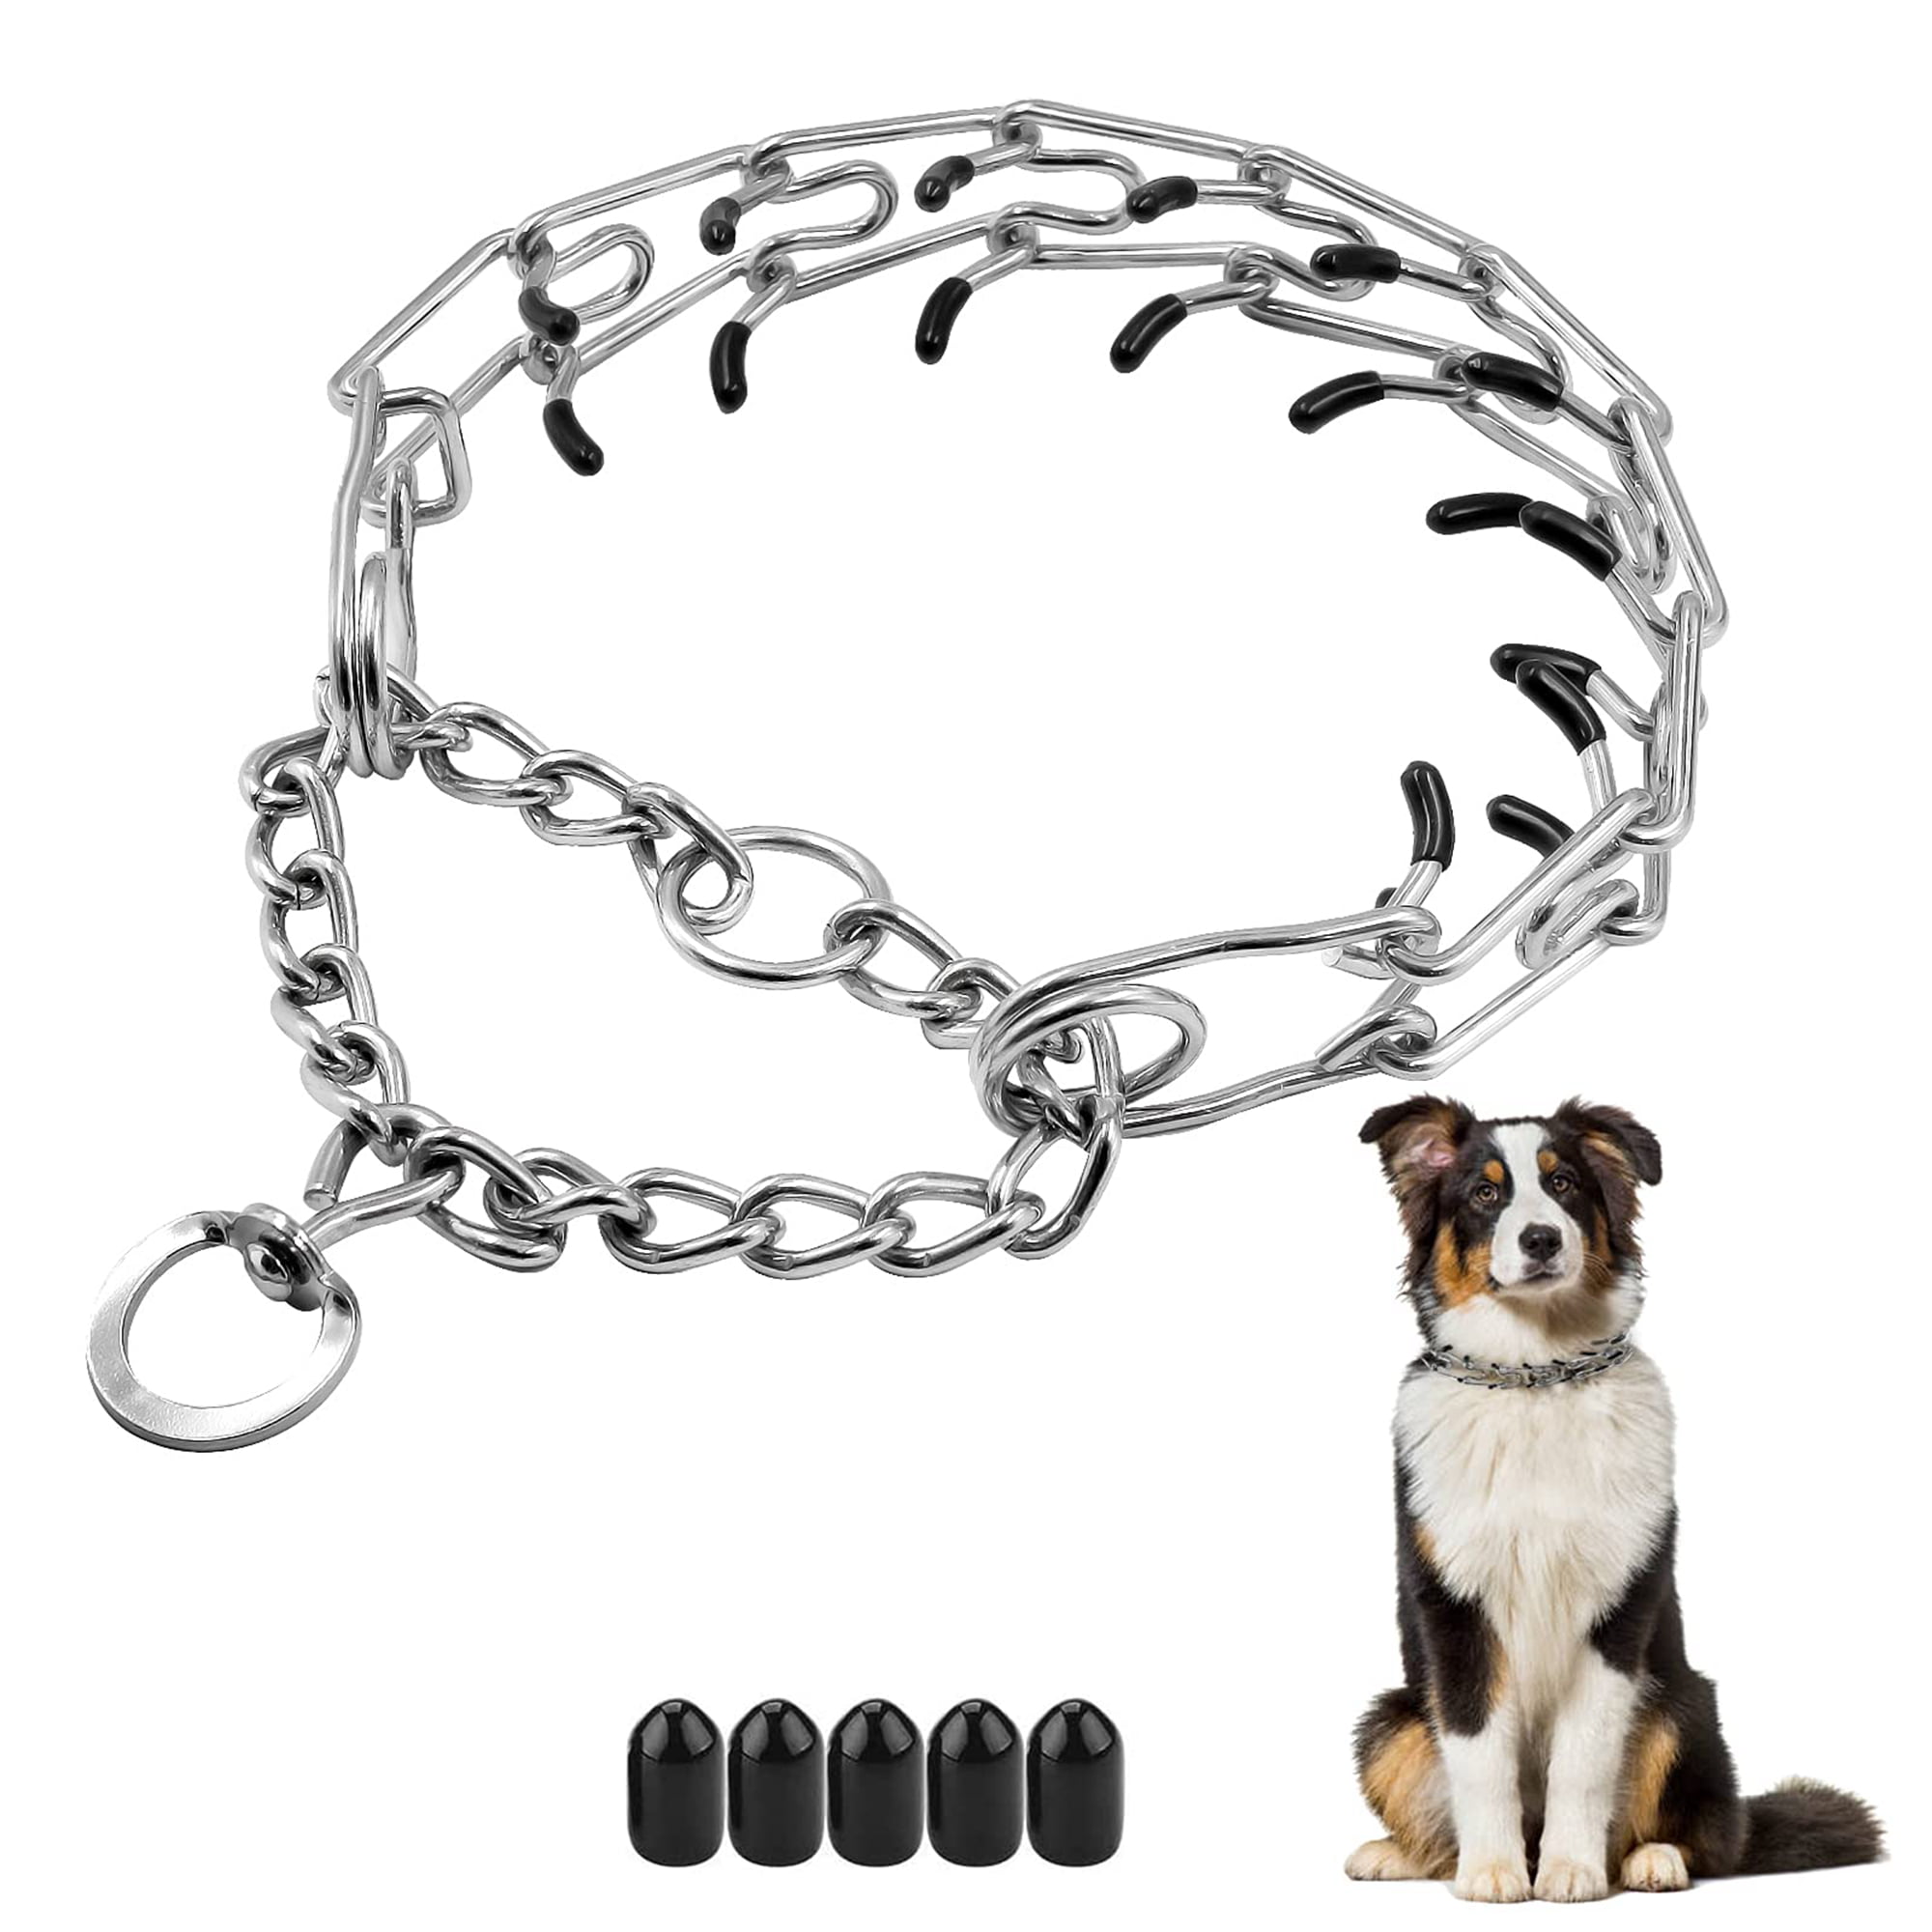 Pinch Collar for Dogs with Metal Dog Leash Adjust Stainless Steel Links No Pull Choker Dog Collar w/ Quick Release Snap Buckle Prong Collar for Dogs Rubber Tips Choke Collar for Small Large Dogs 